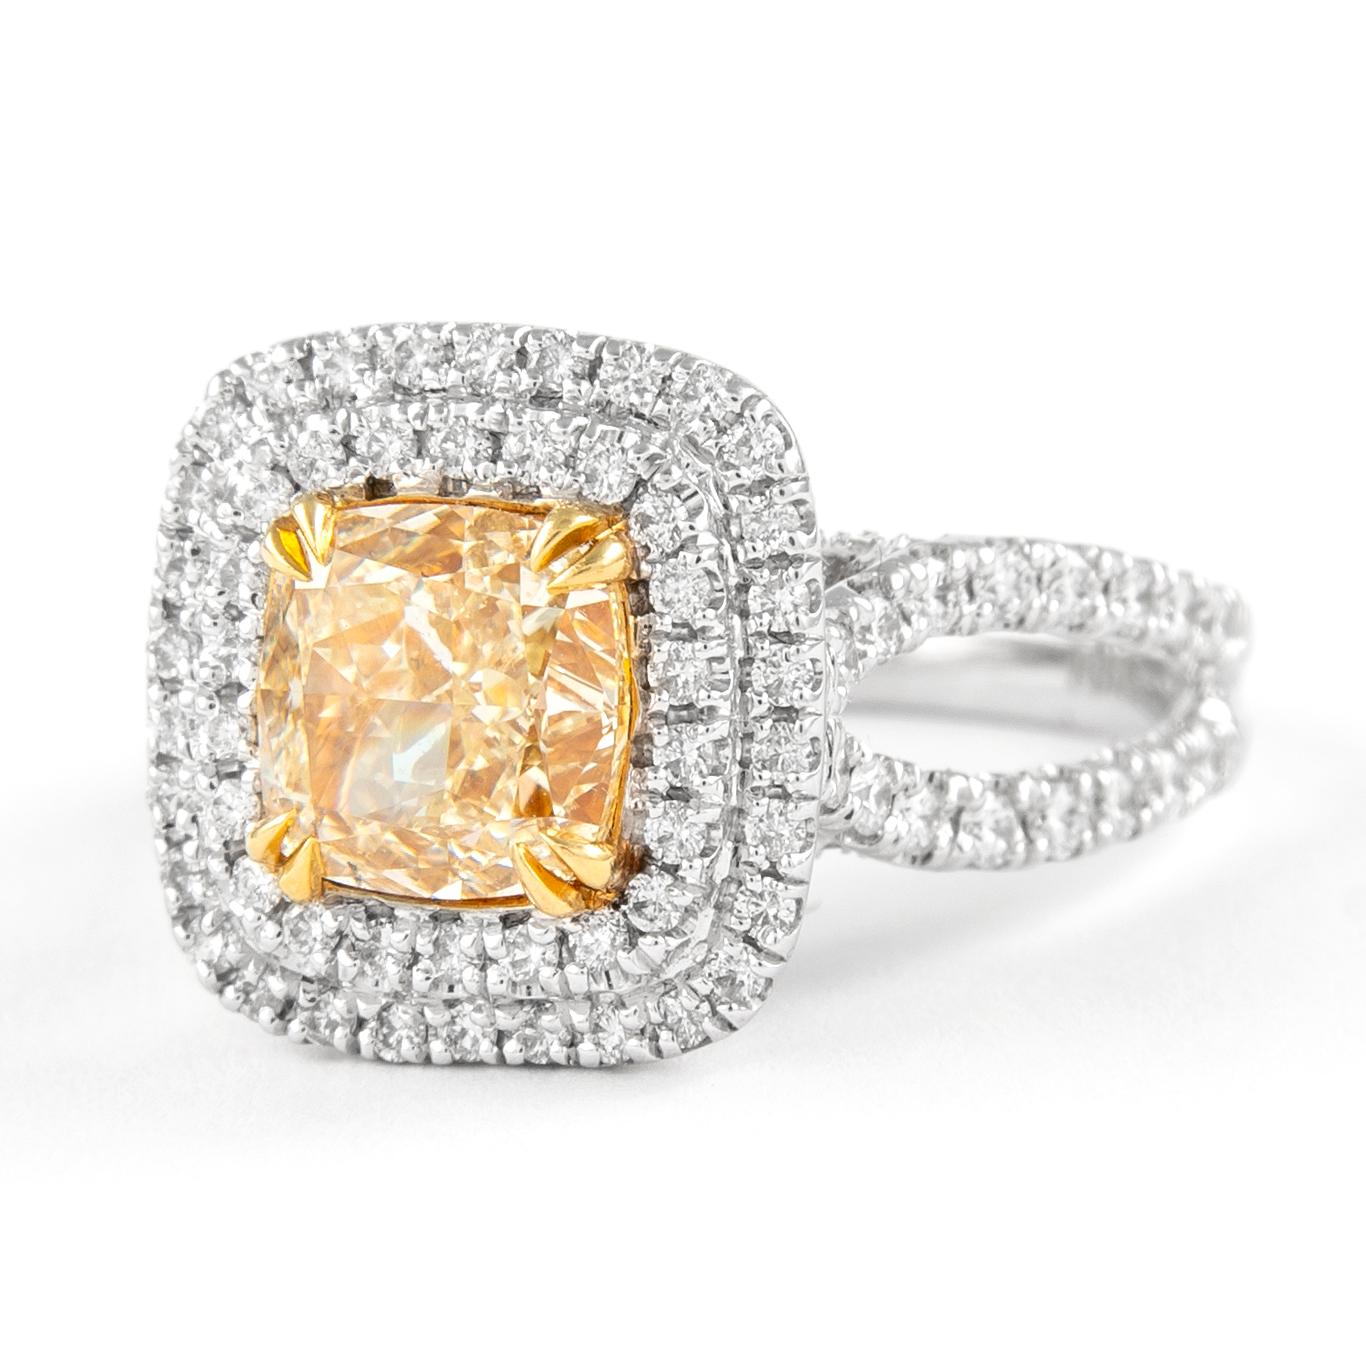 Contemporary Alexander 2.11ct Fancy Intense Yellow VS2 Cushion Diamond Double Halo Ring 18k For Sale